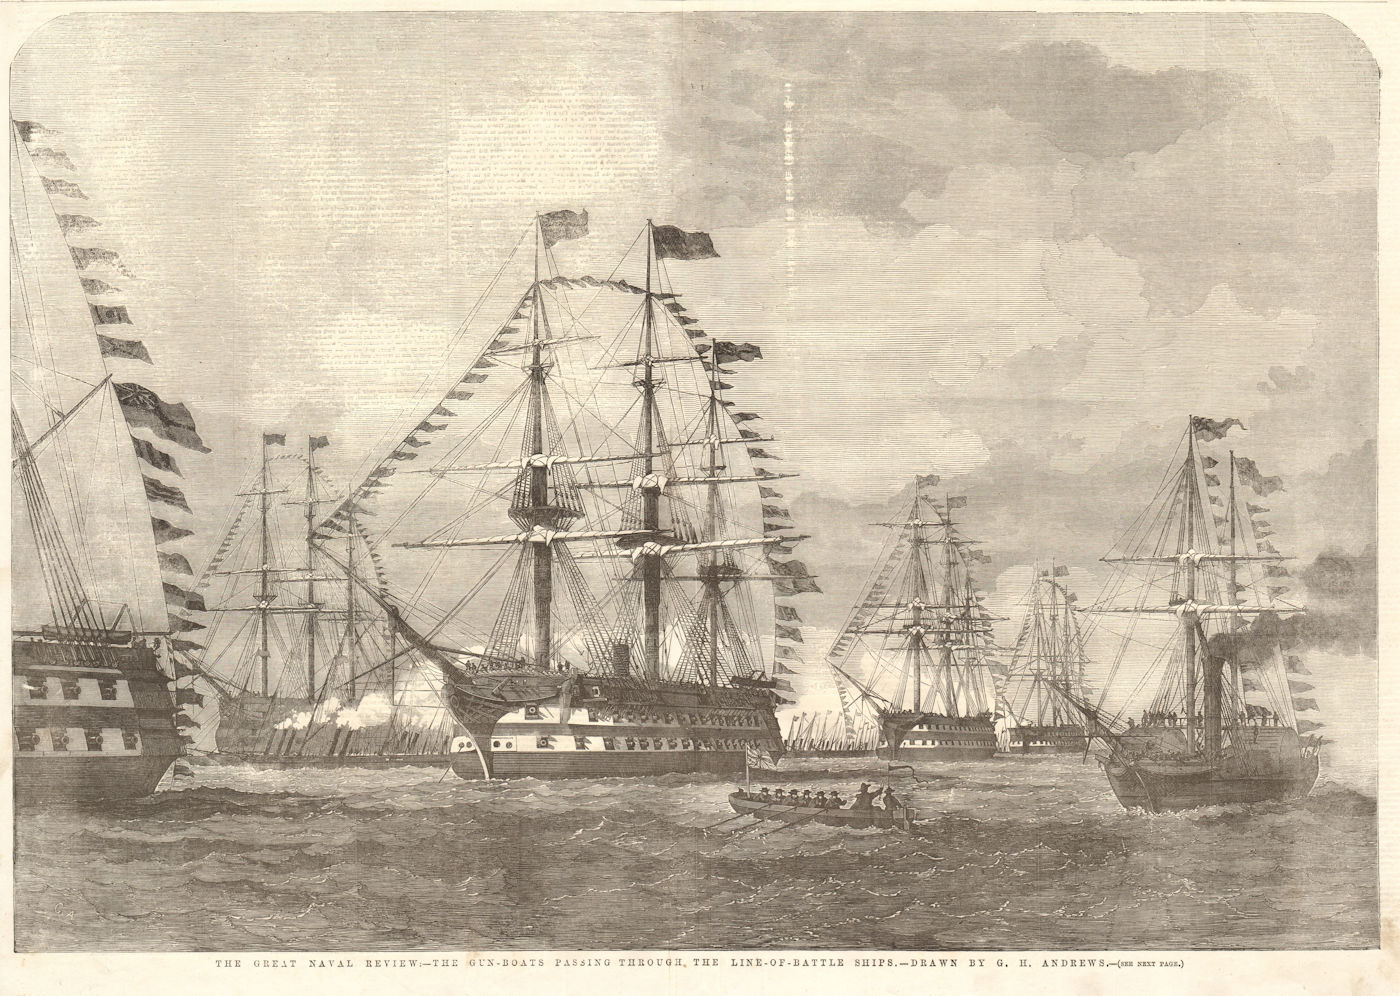 Naval Review: the gun-boats passing the line-of-battleships. Portsmouth 1856